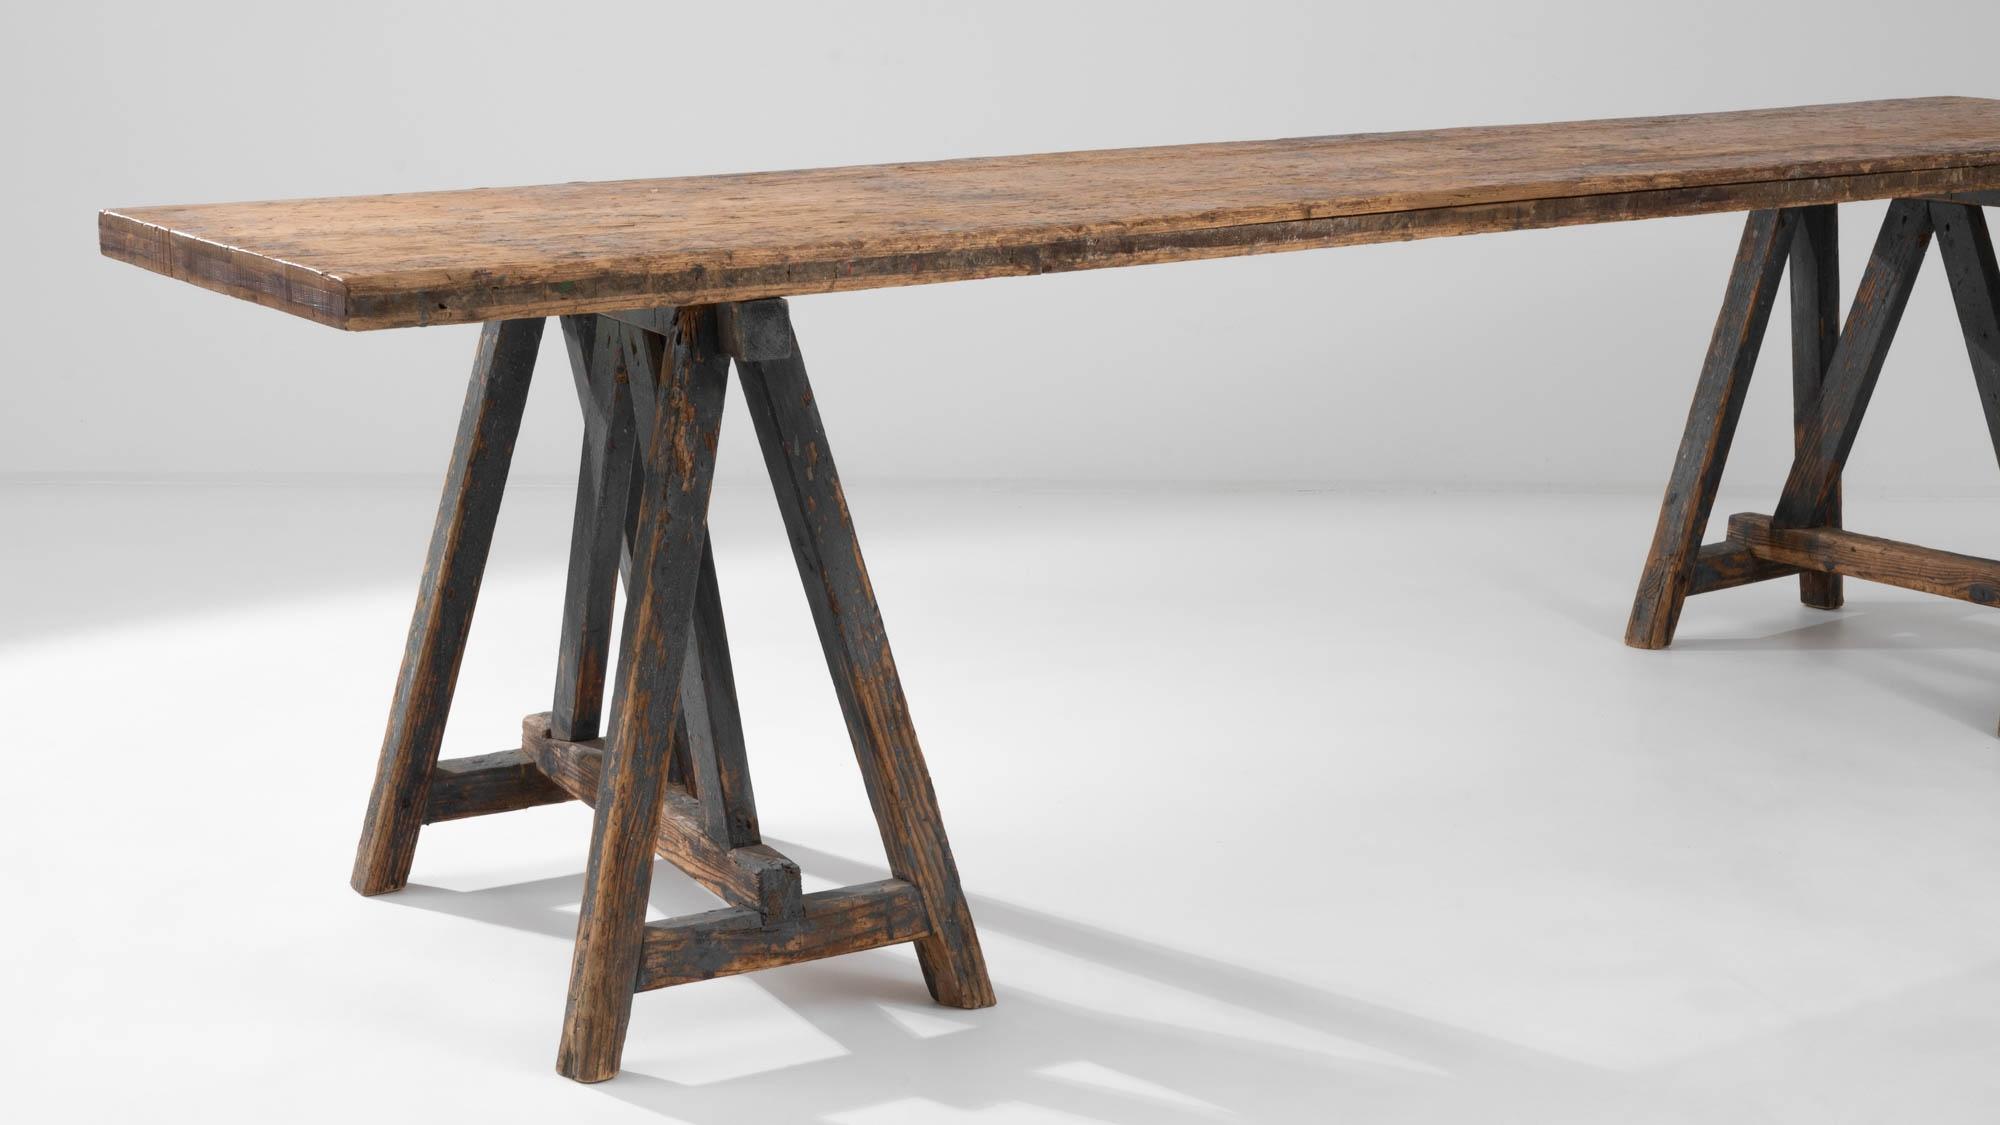 Made in France during the 20th century, this wooden dining table features A-shaped trestle legs, lending it a stylish angular design while providing sturdy support for the plank tabletop. The stripped dark gray-blue finish of the base creates an